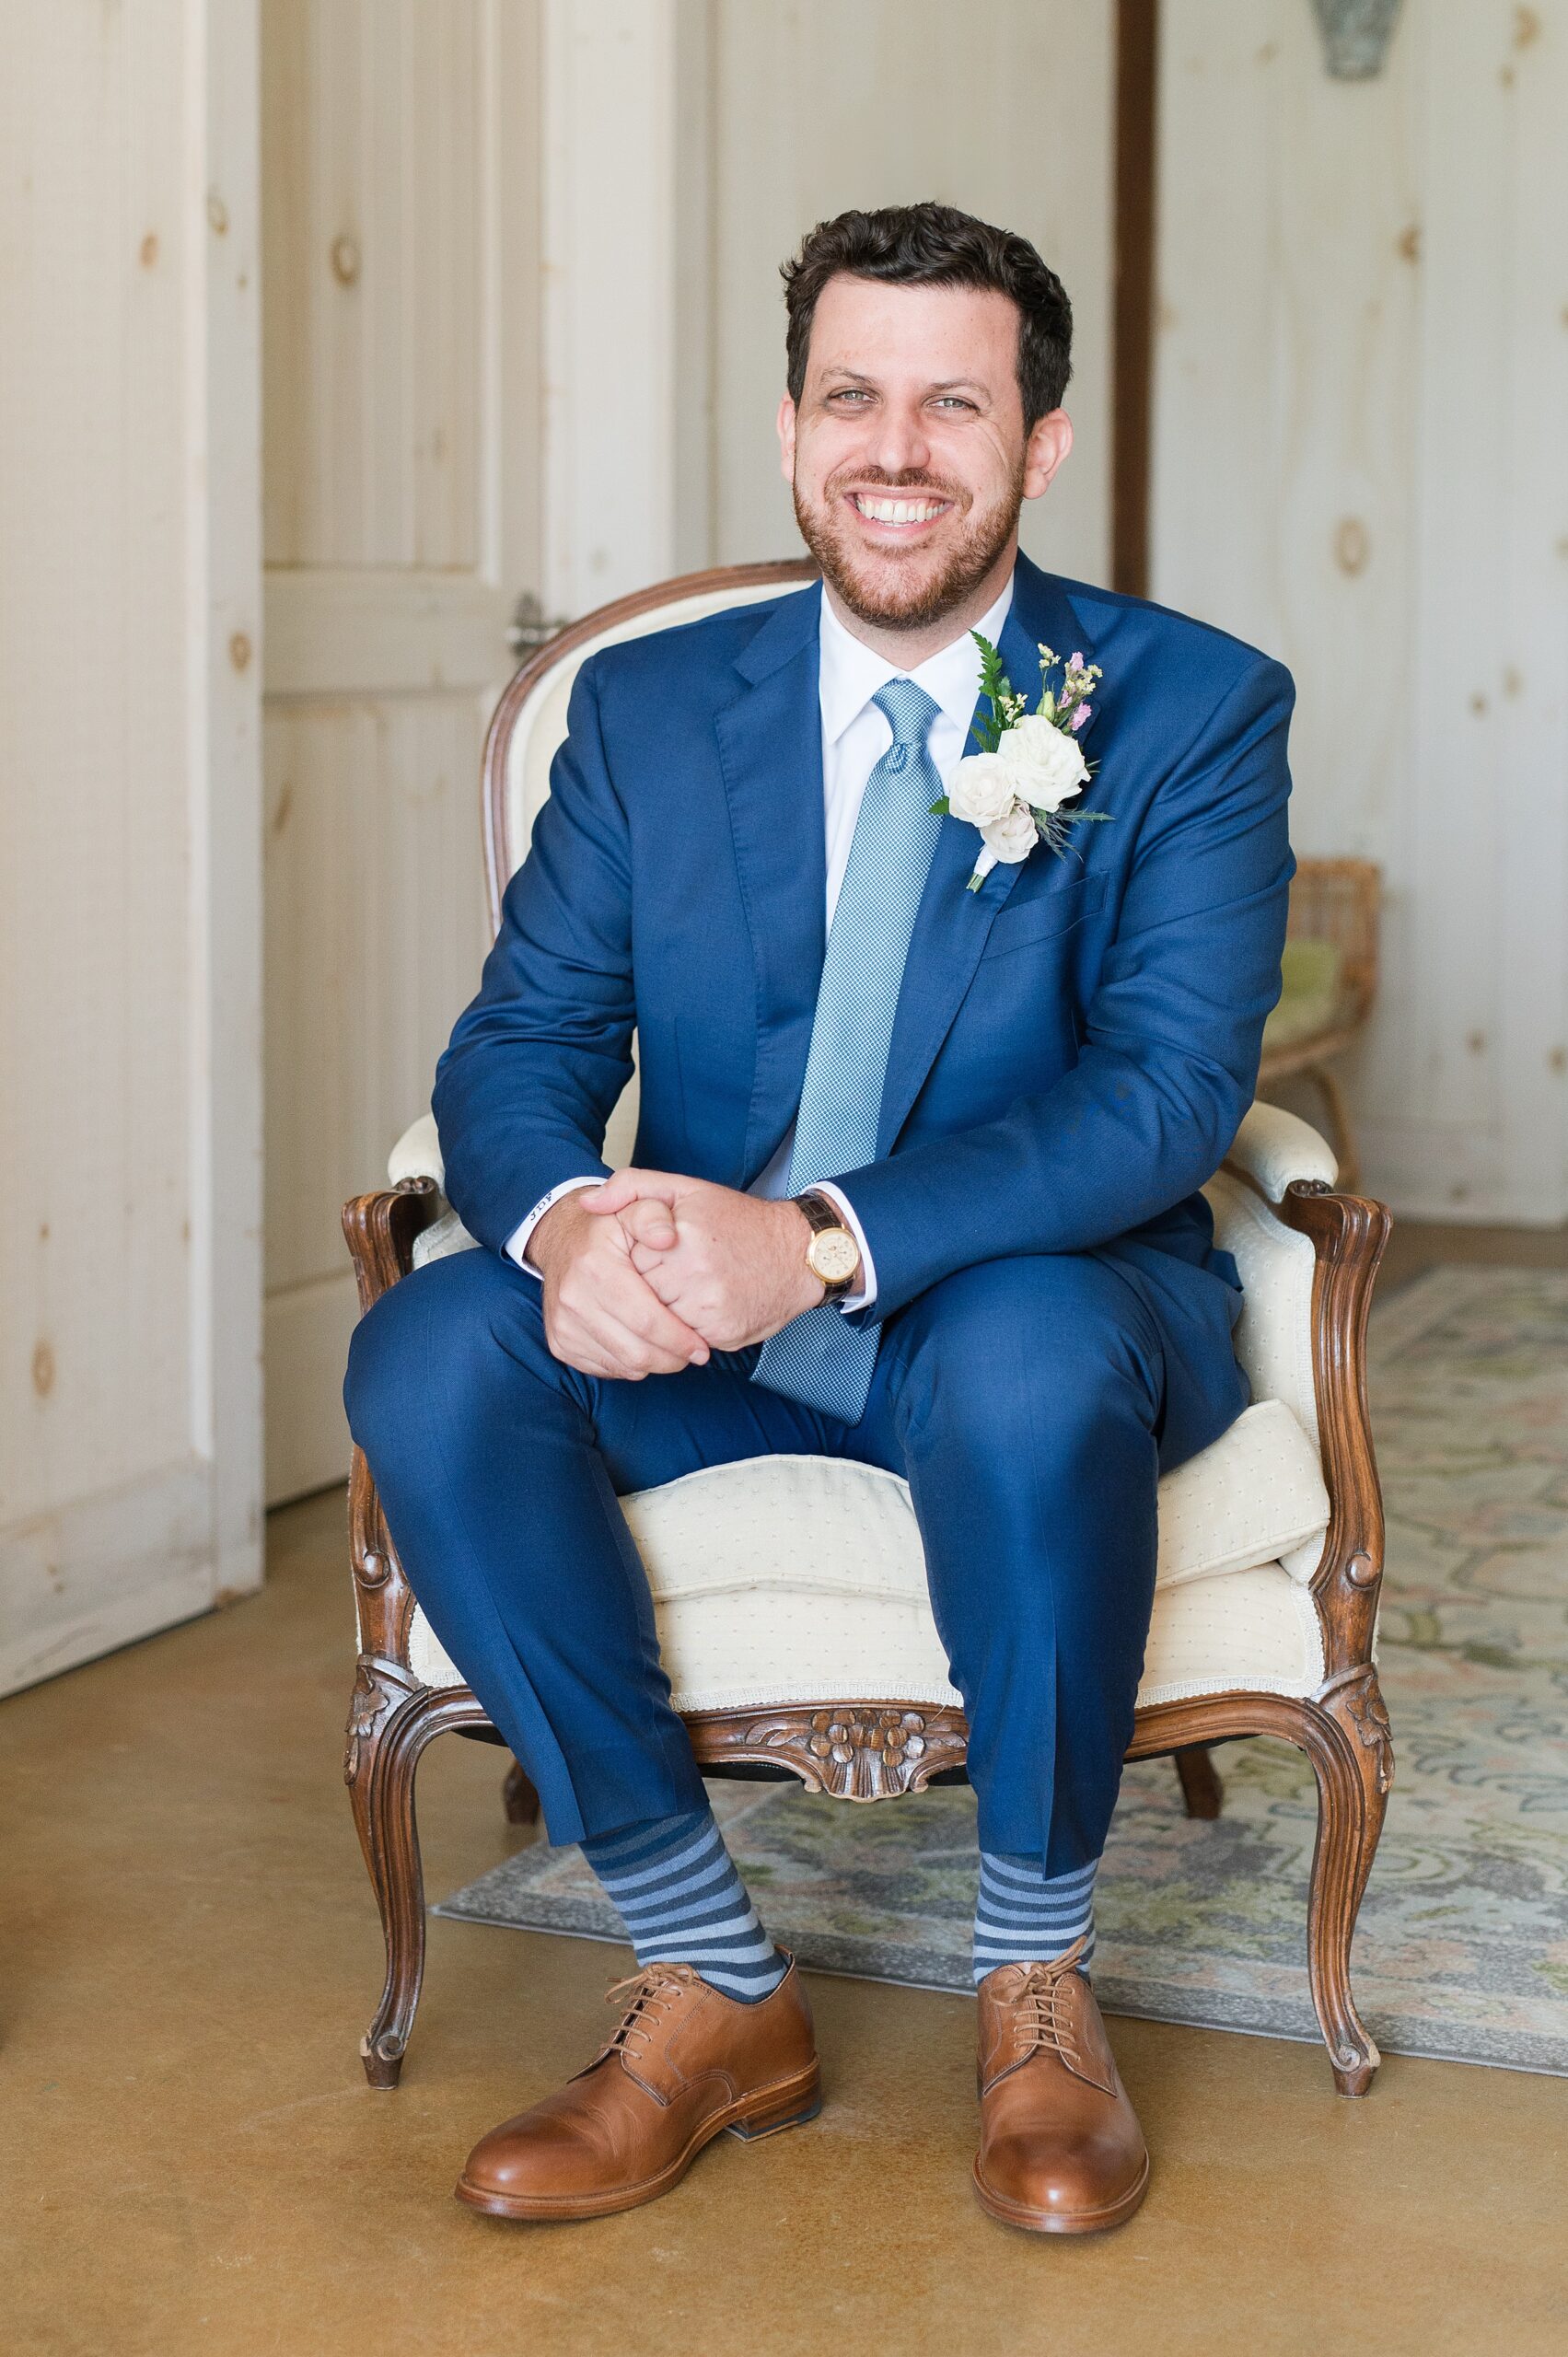 A groom sits in an antique chair smiling big in a blue suit